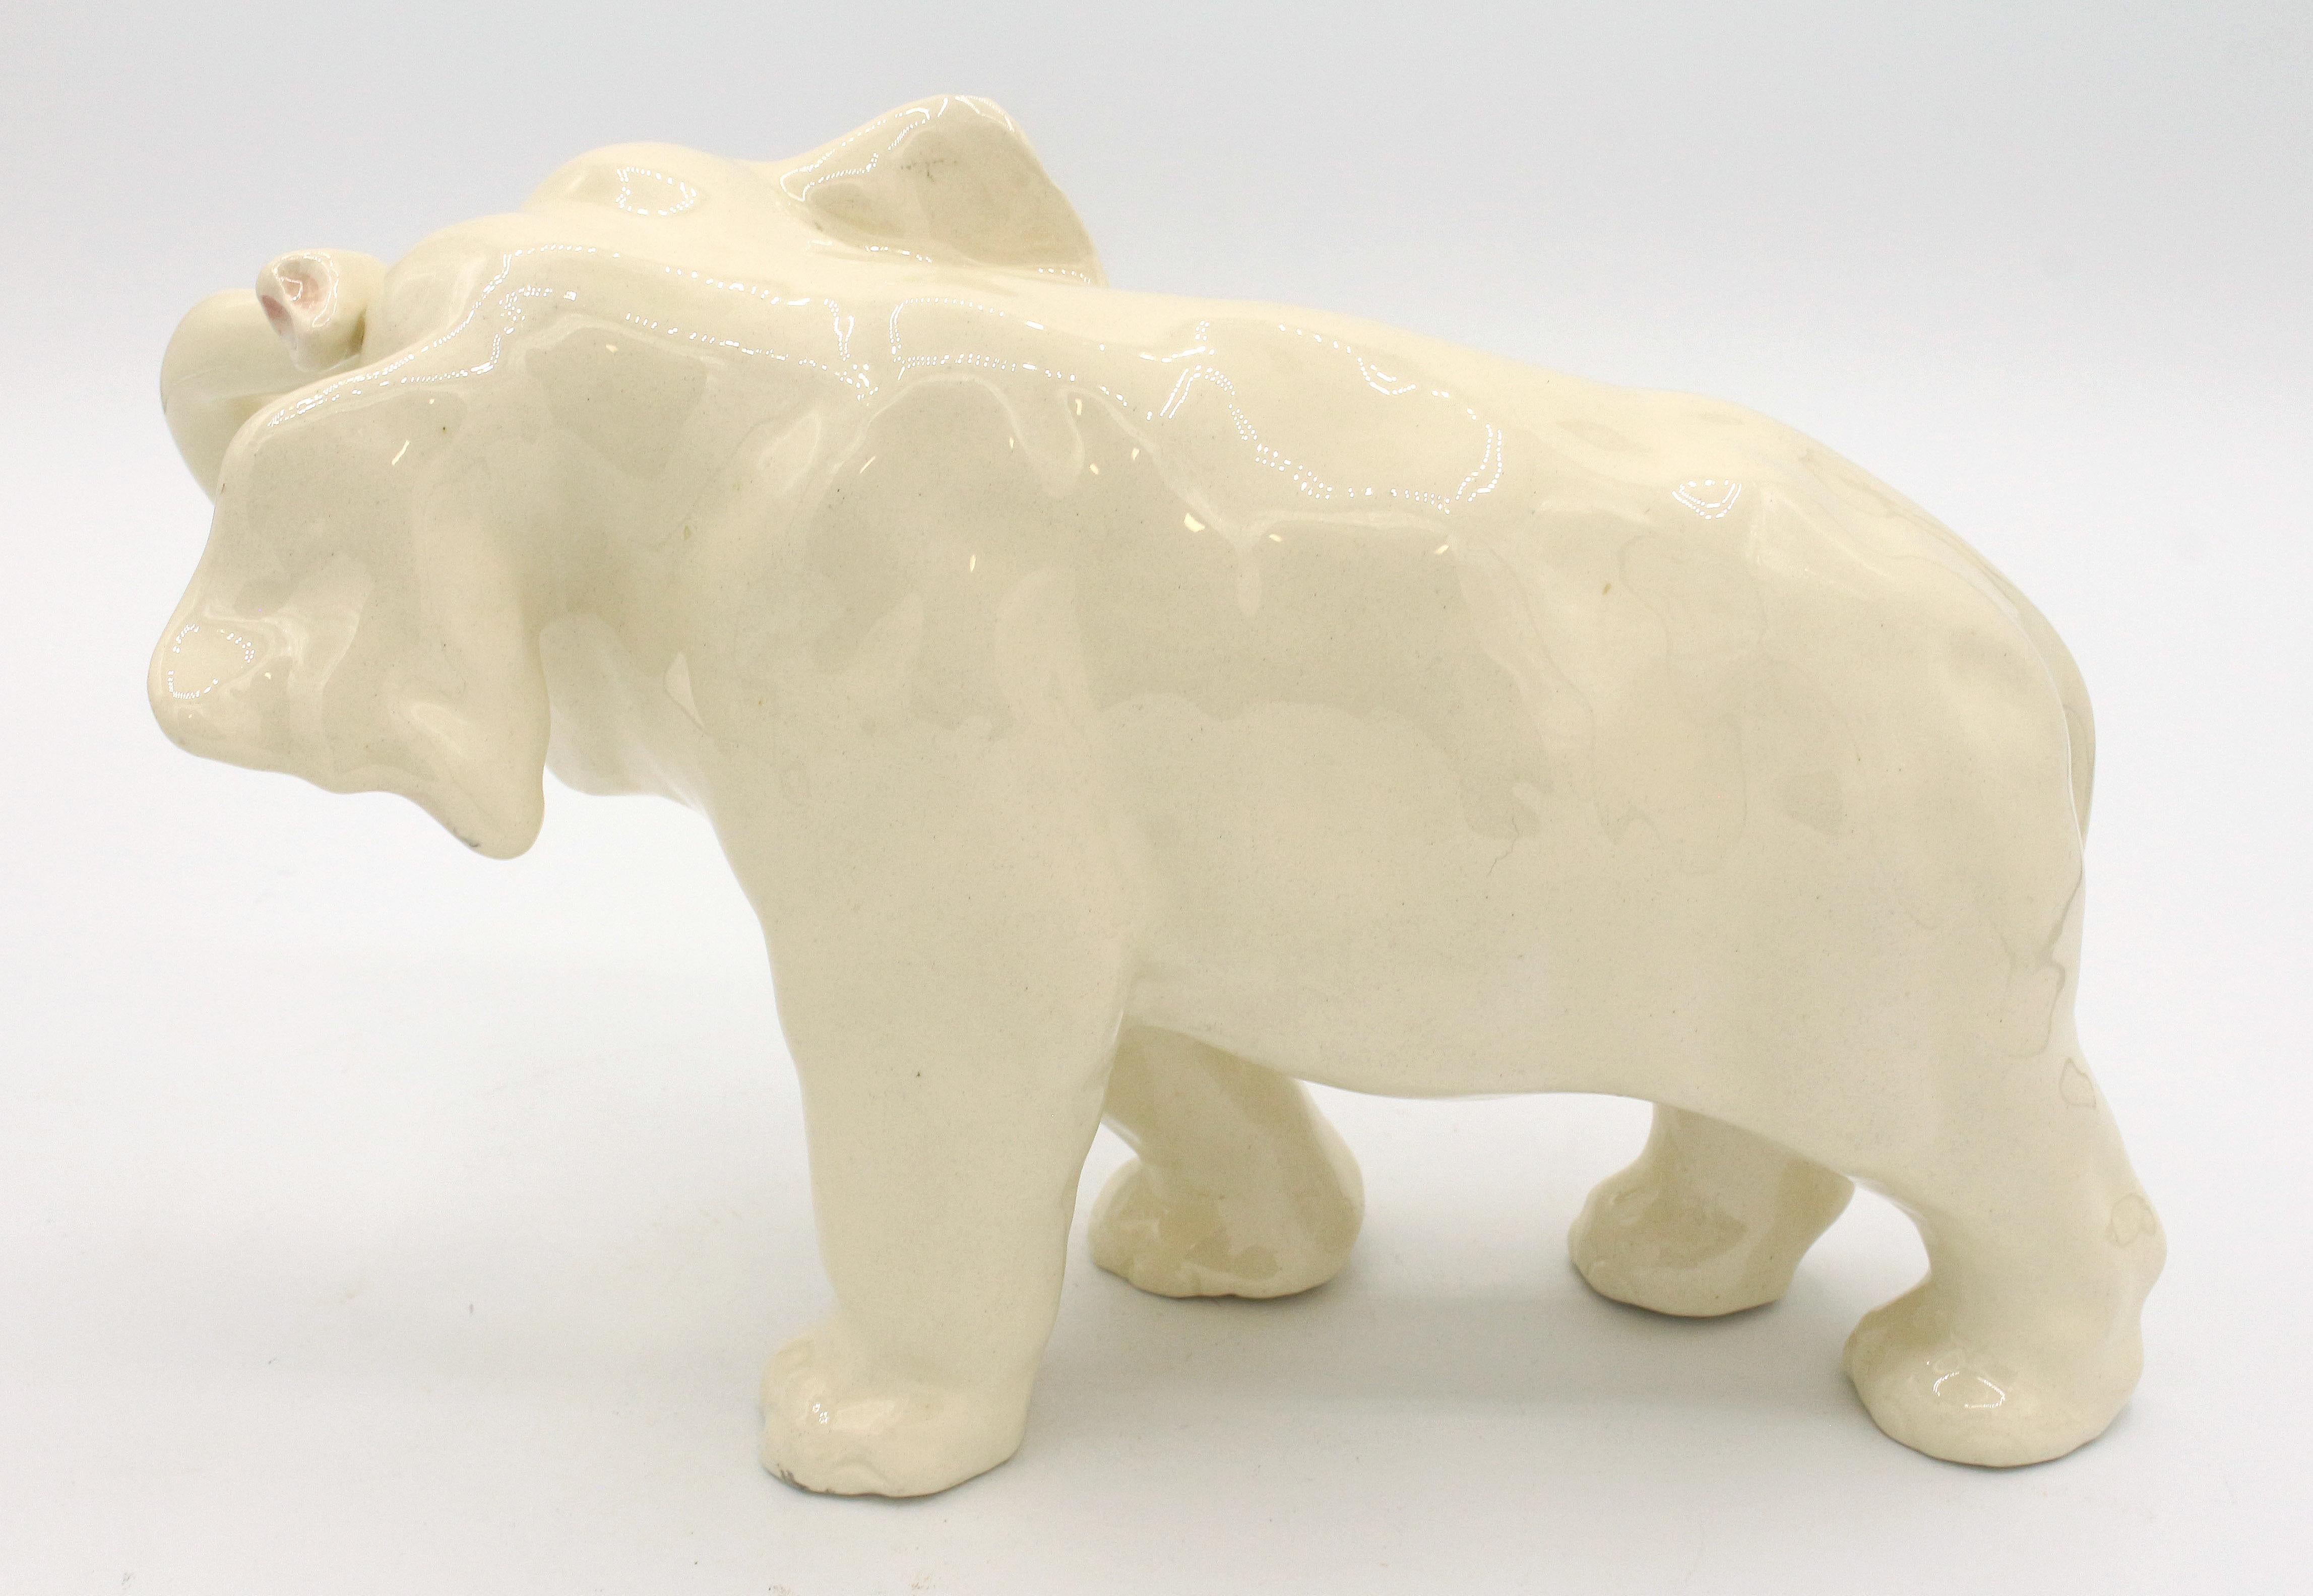 Porcelain blanc de chine elephant, Austria, Art Deco period. Chip on tip of ear and front right foot. 5 3/4